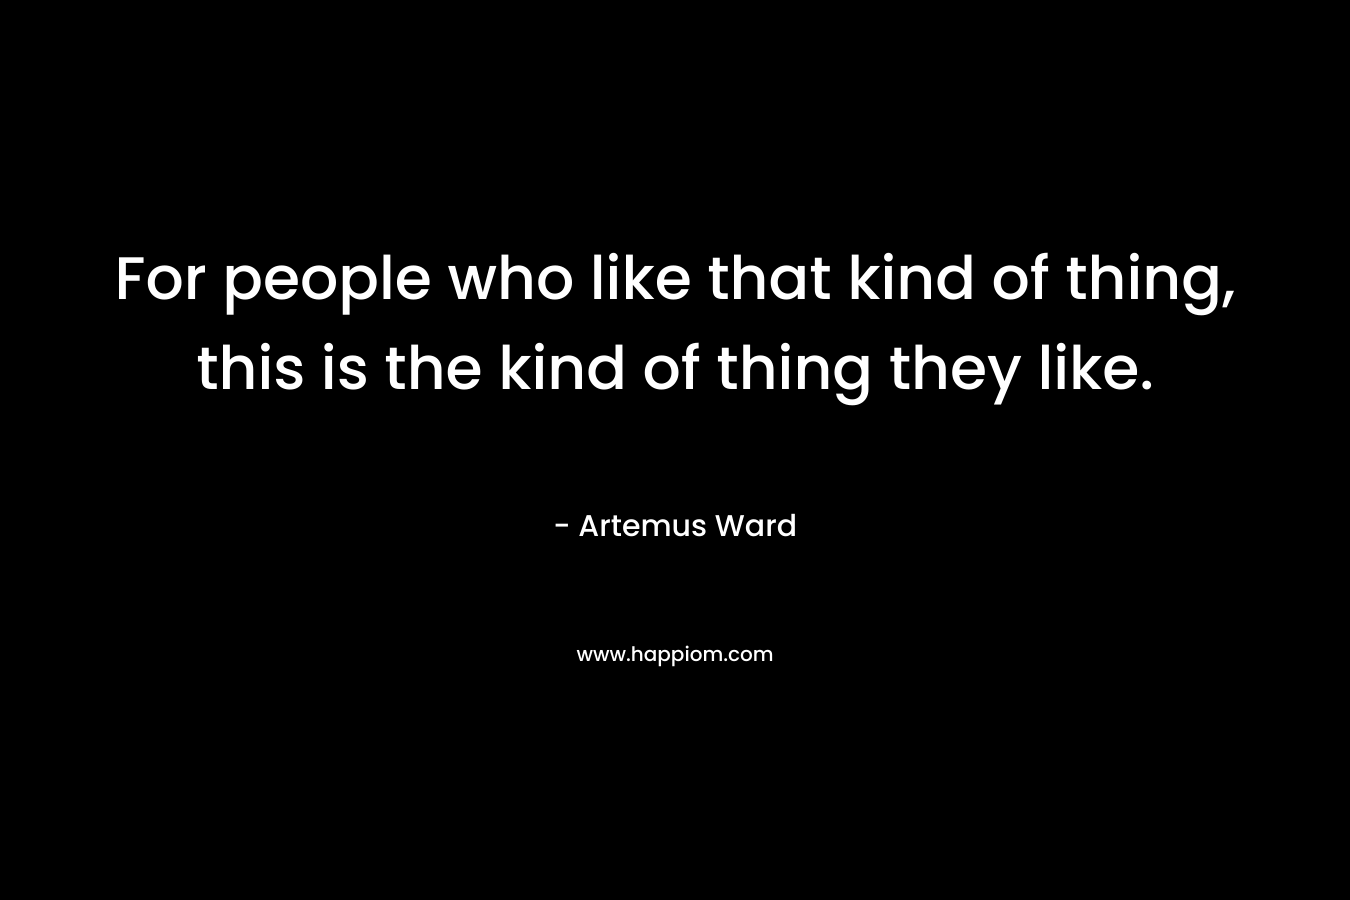 For people who like that kind of thing, this is the kind of thing they like. – Artemus Ward